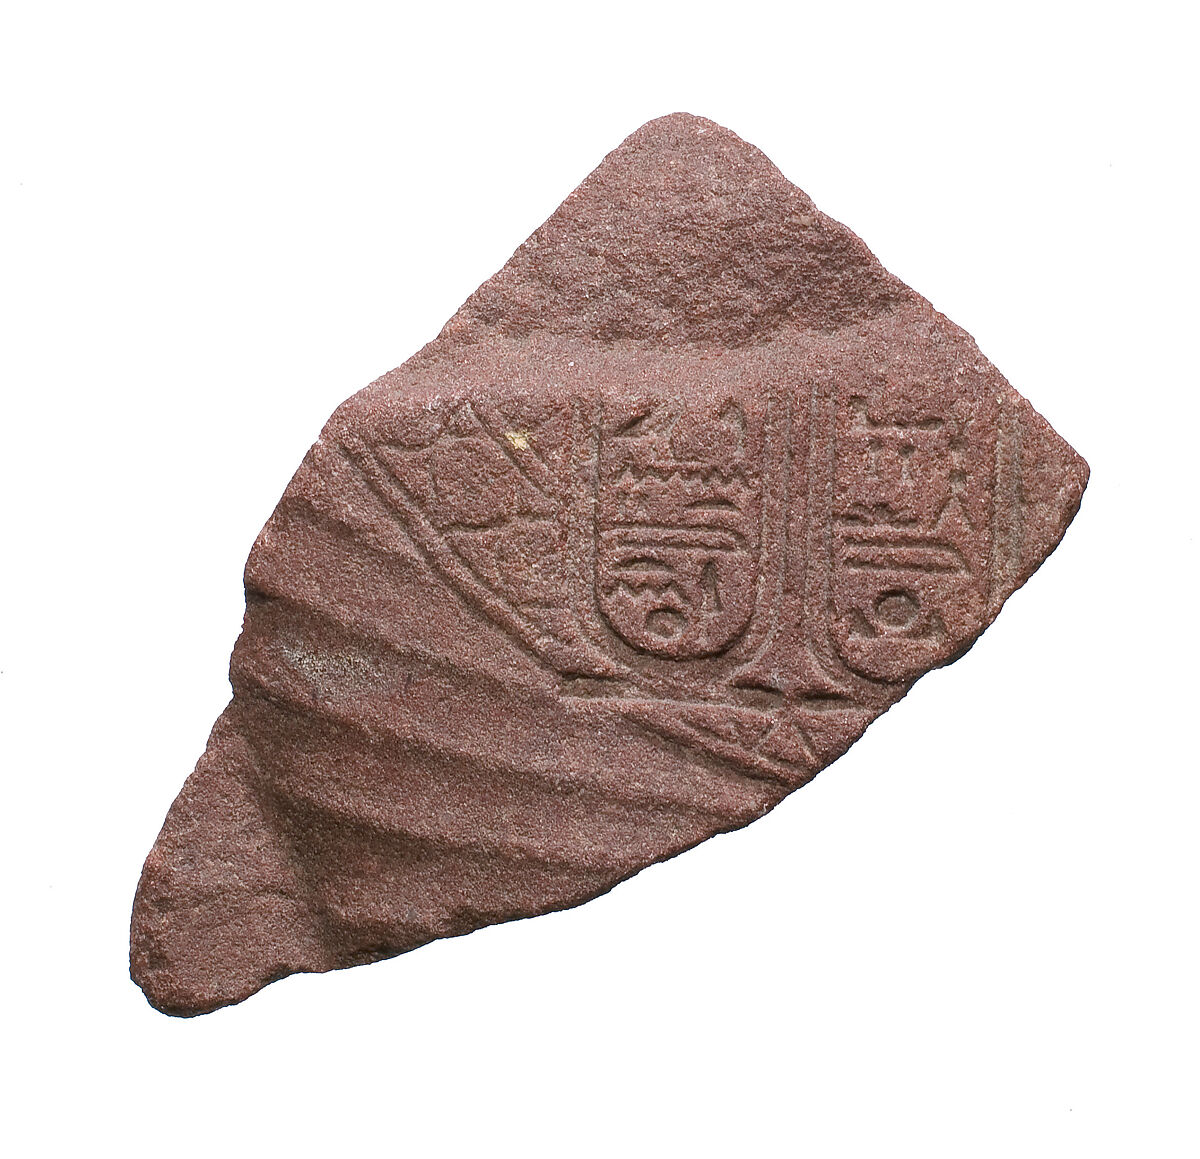 Upper right chest of queen in pleated garment and elaborate broad collar, with cartouches of the Aten, Red quartzite 